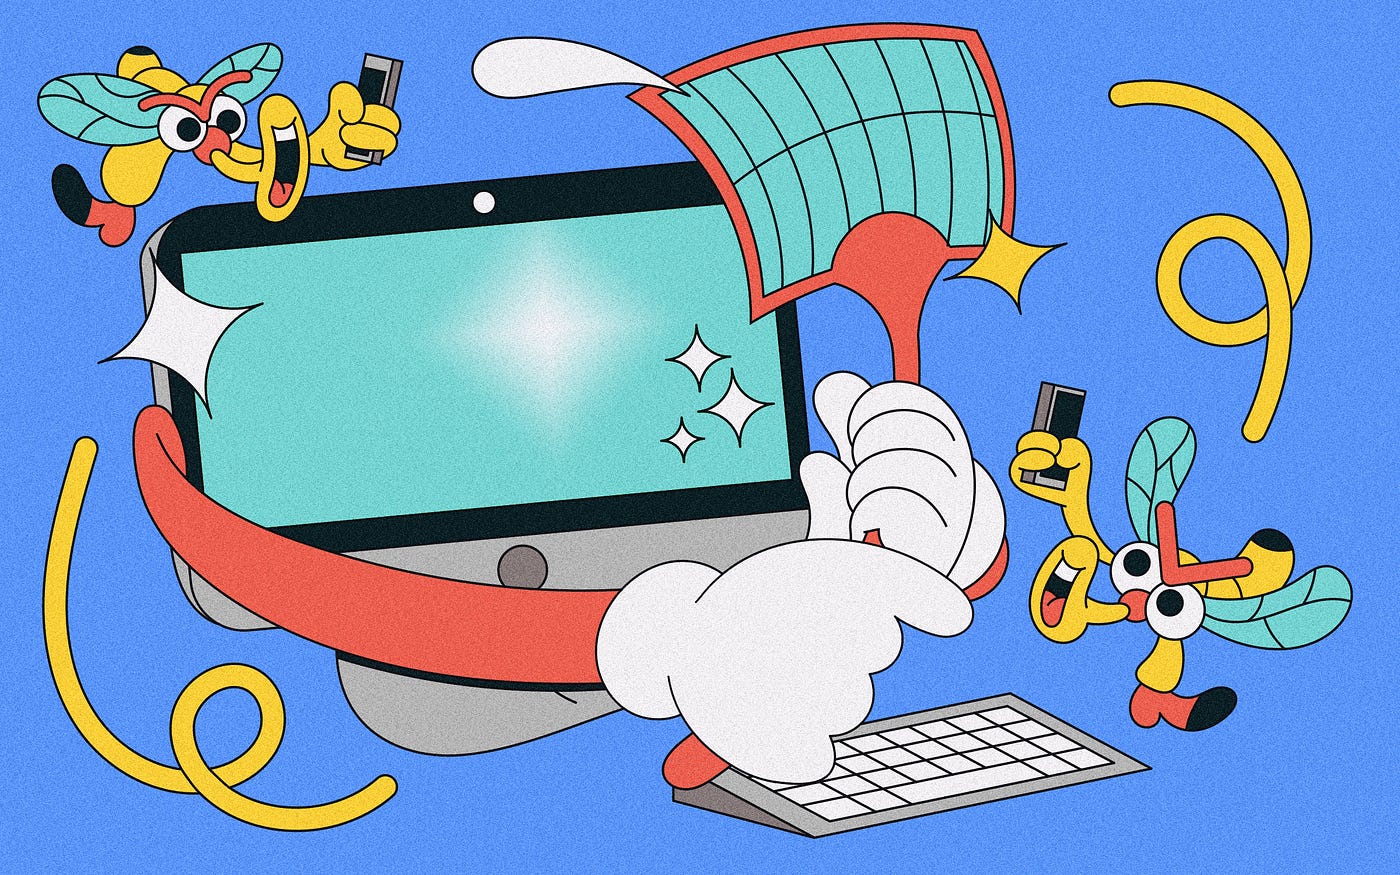 An illustration of a computer with arms trying to swat away flies, who represent annoying customers.